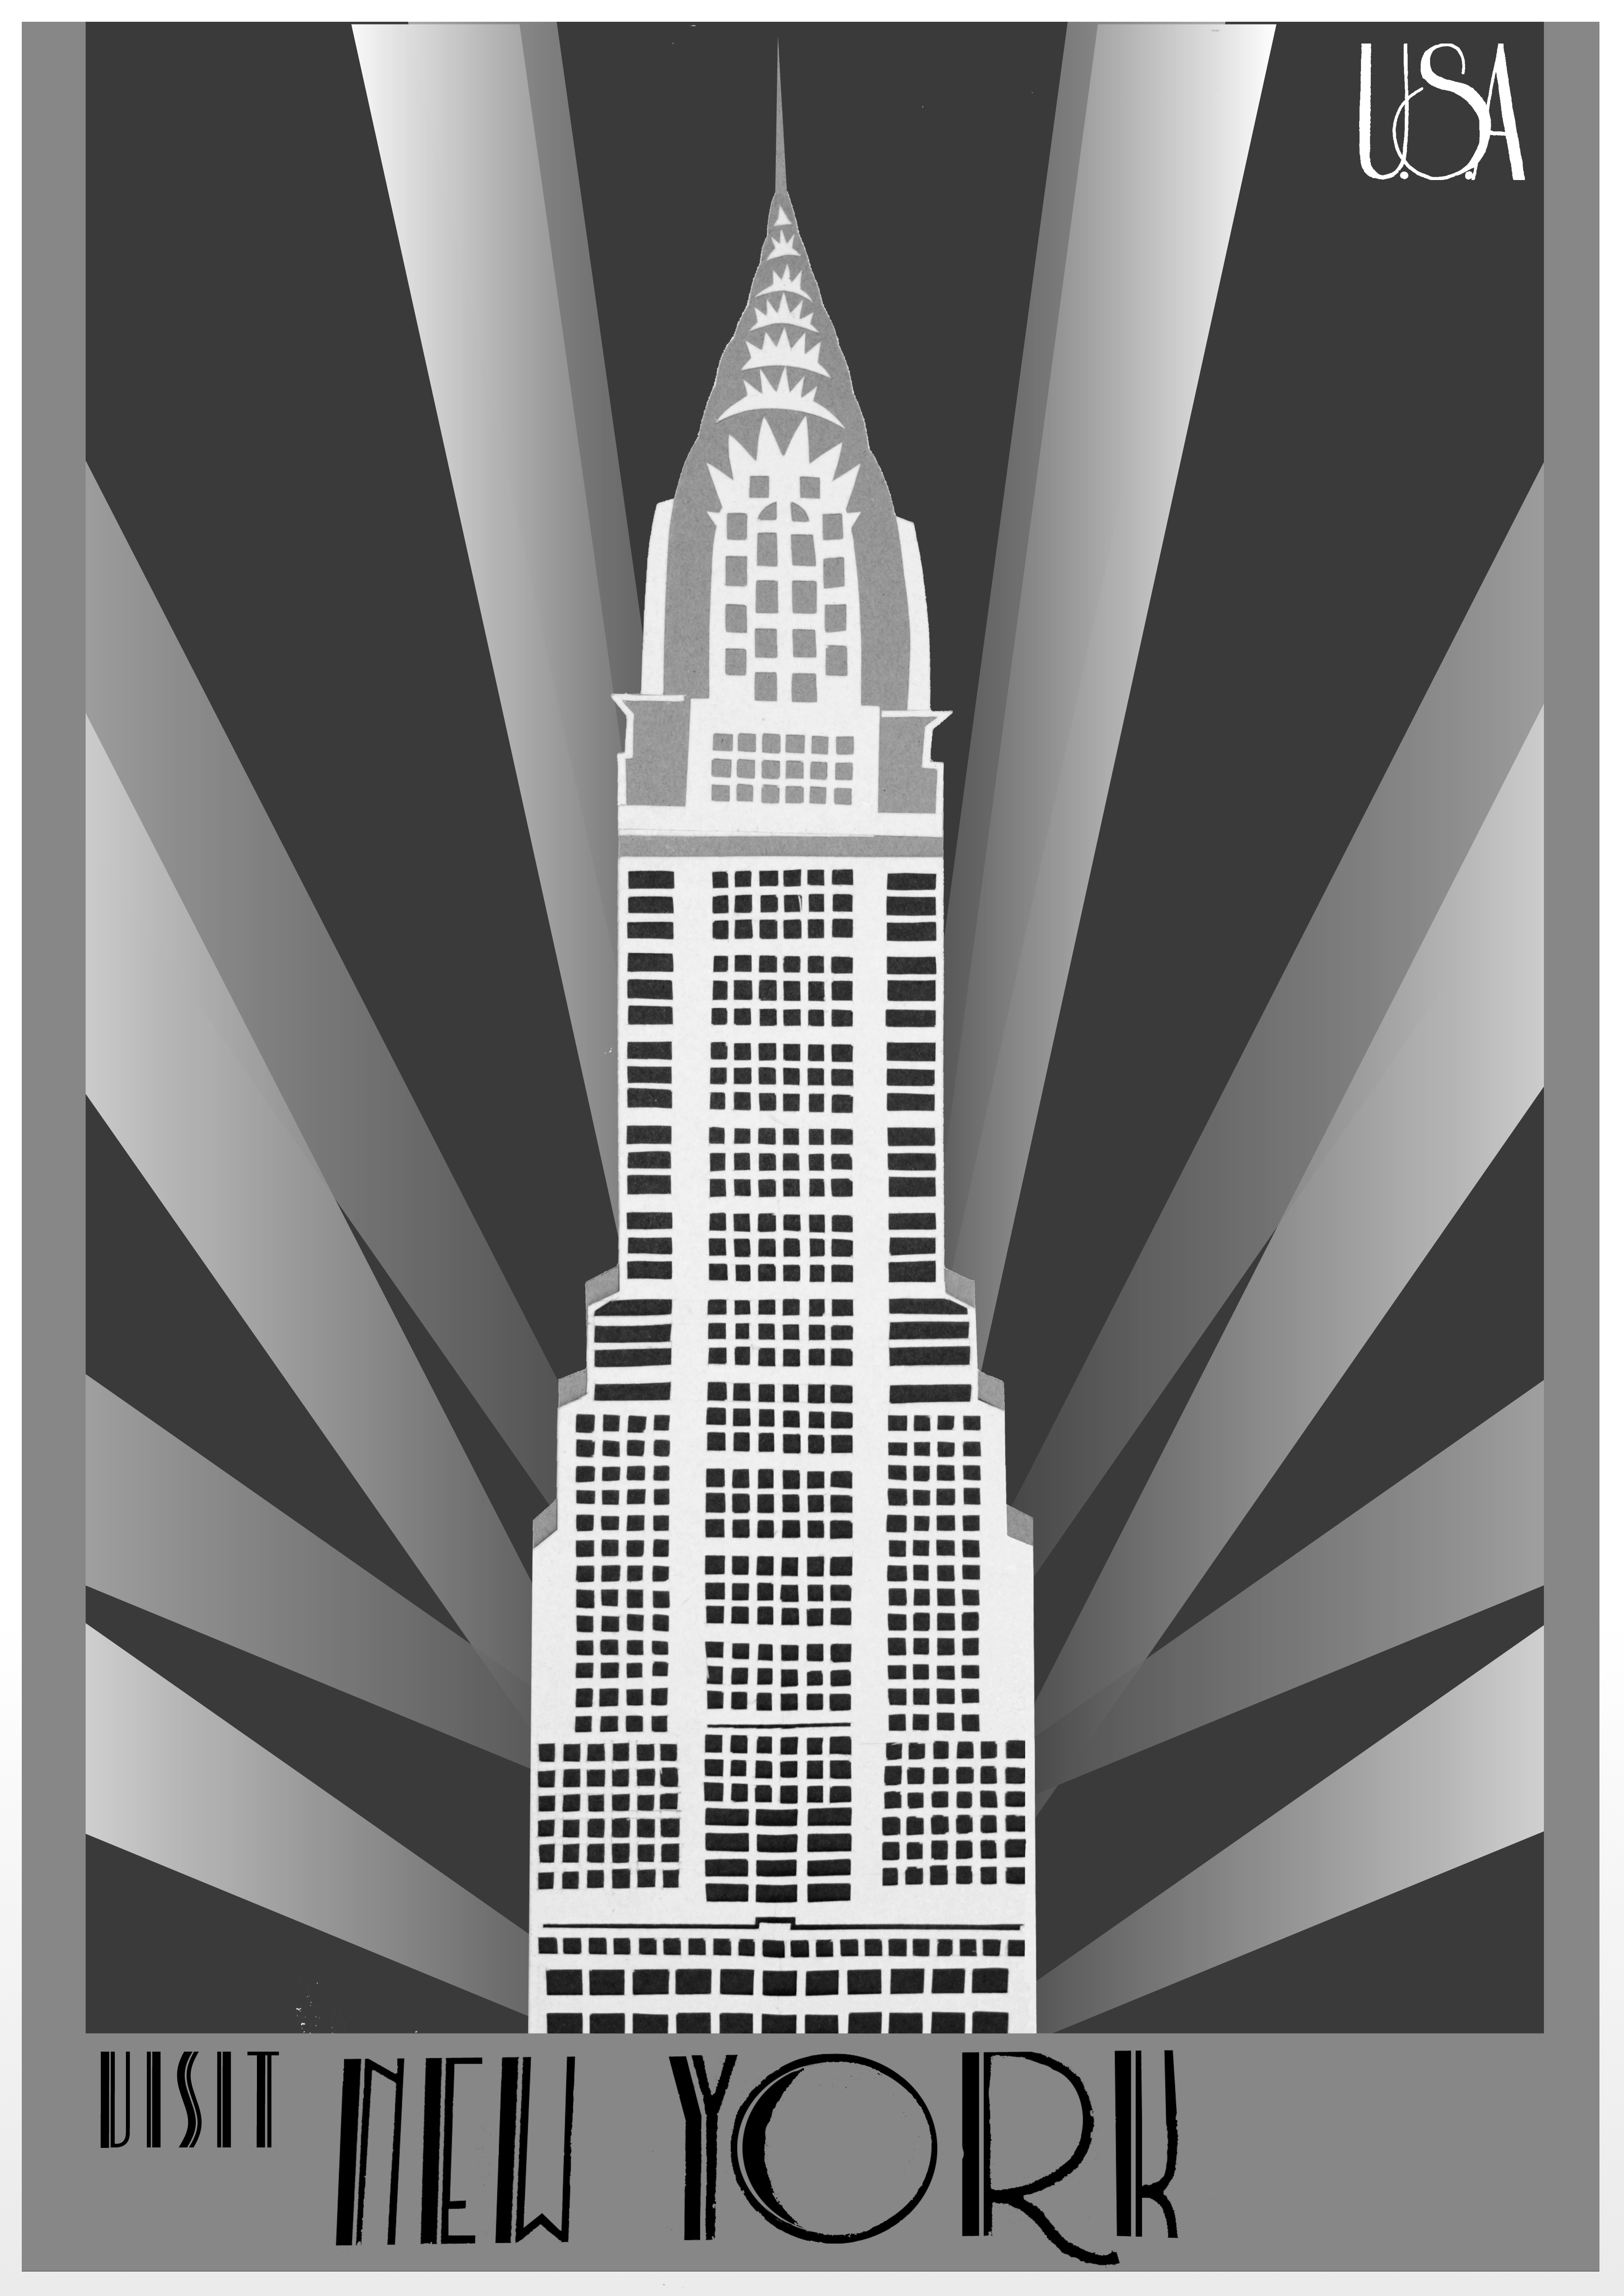 Art deco features of the chrysler building #1